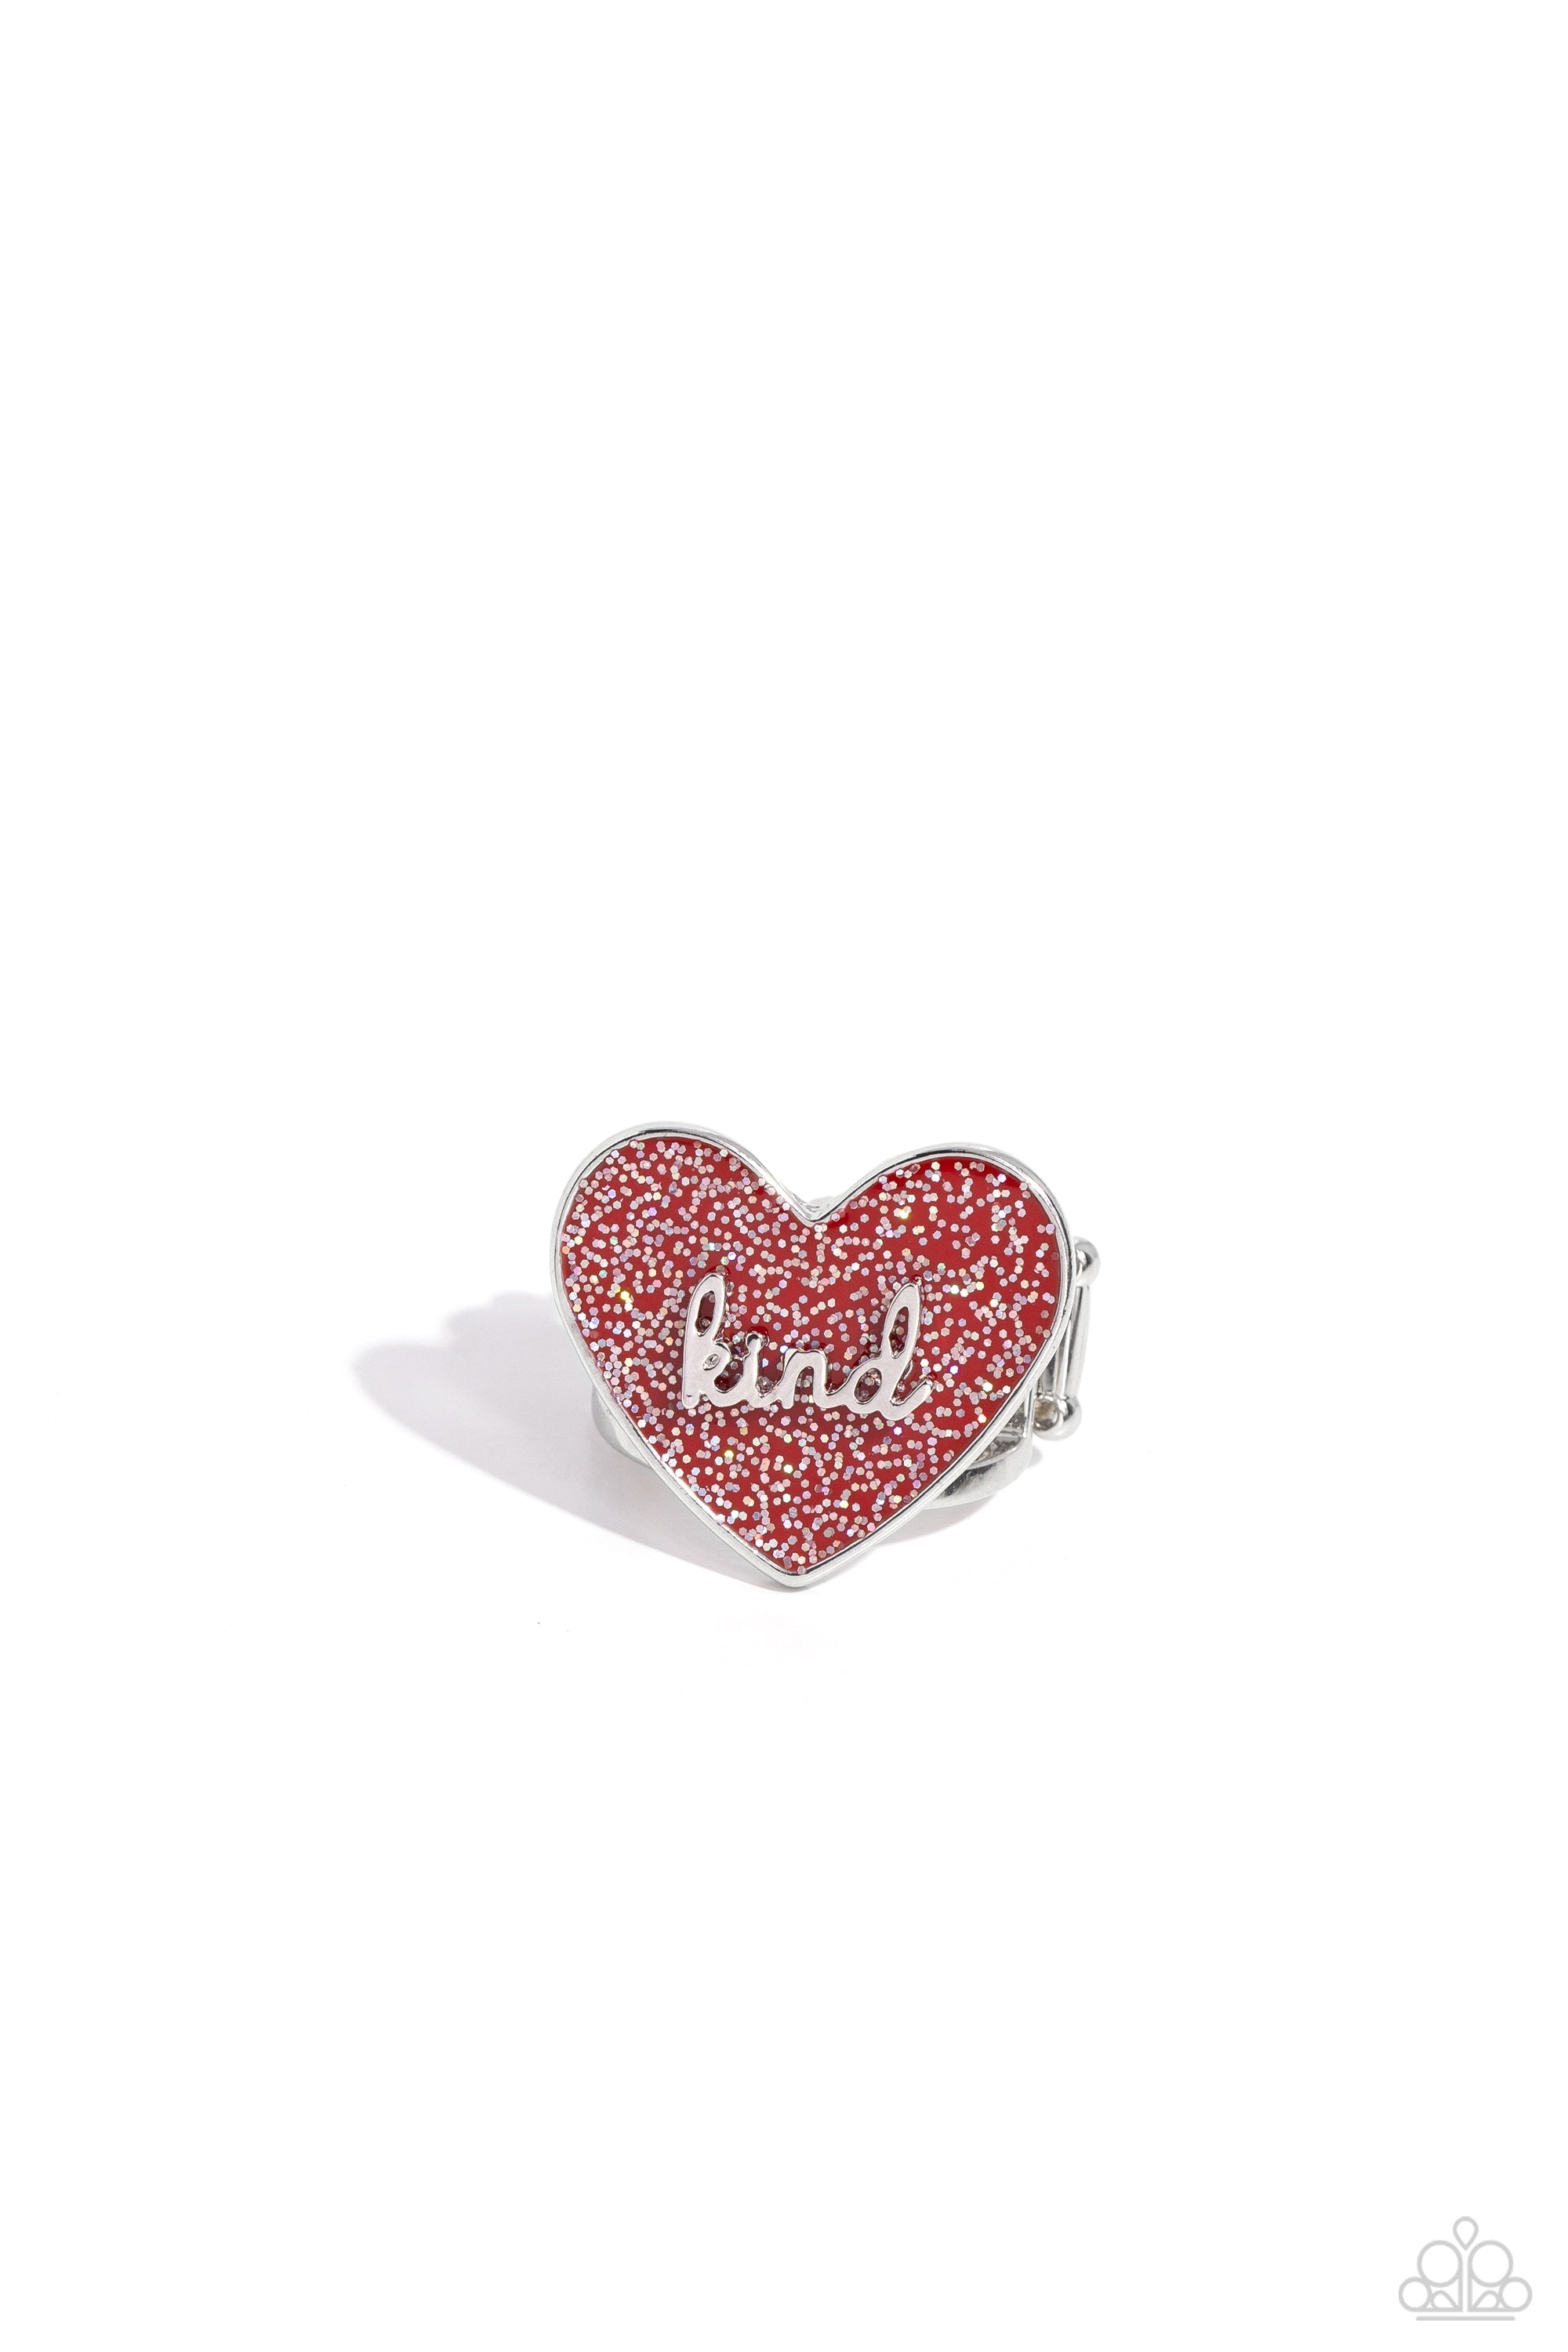 Compassionate Couture Red Heart Ring - Paparazzi Accessories- lightbox - CarasShop.com - $5 Jewelry by Cara Jewels